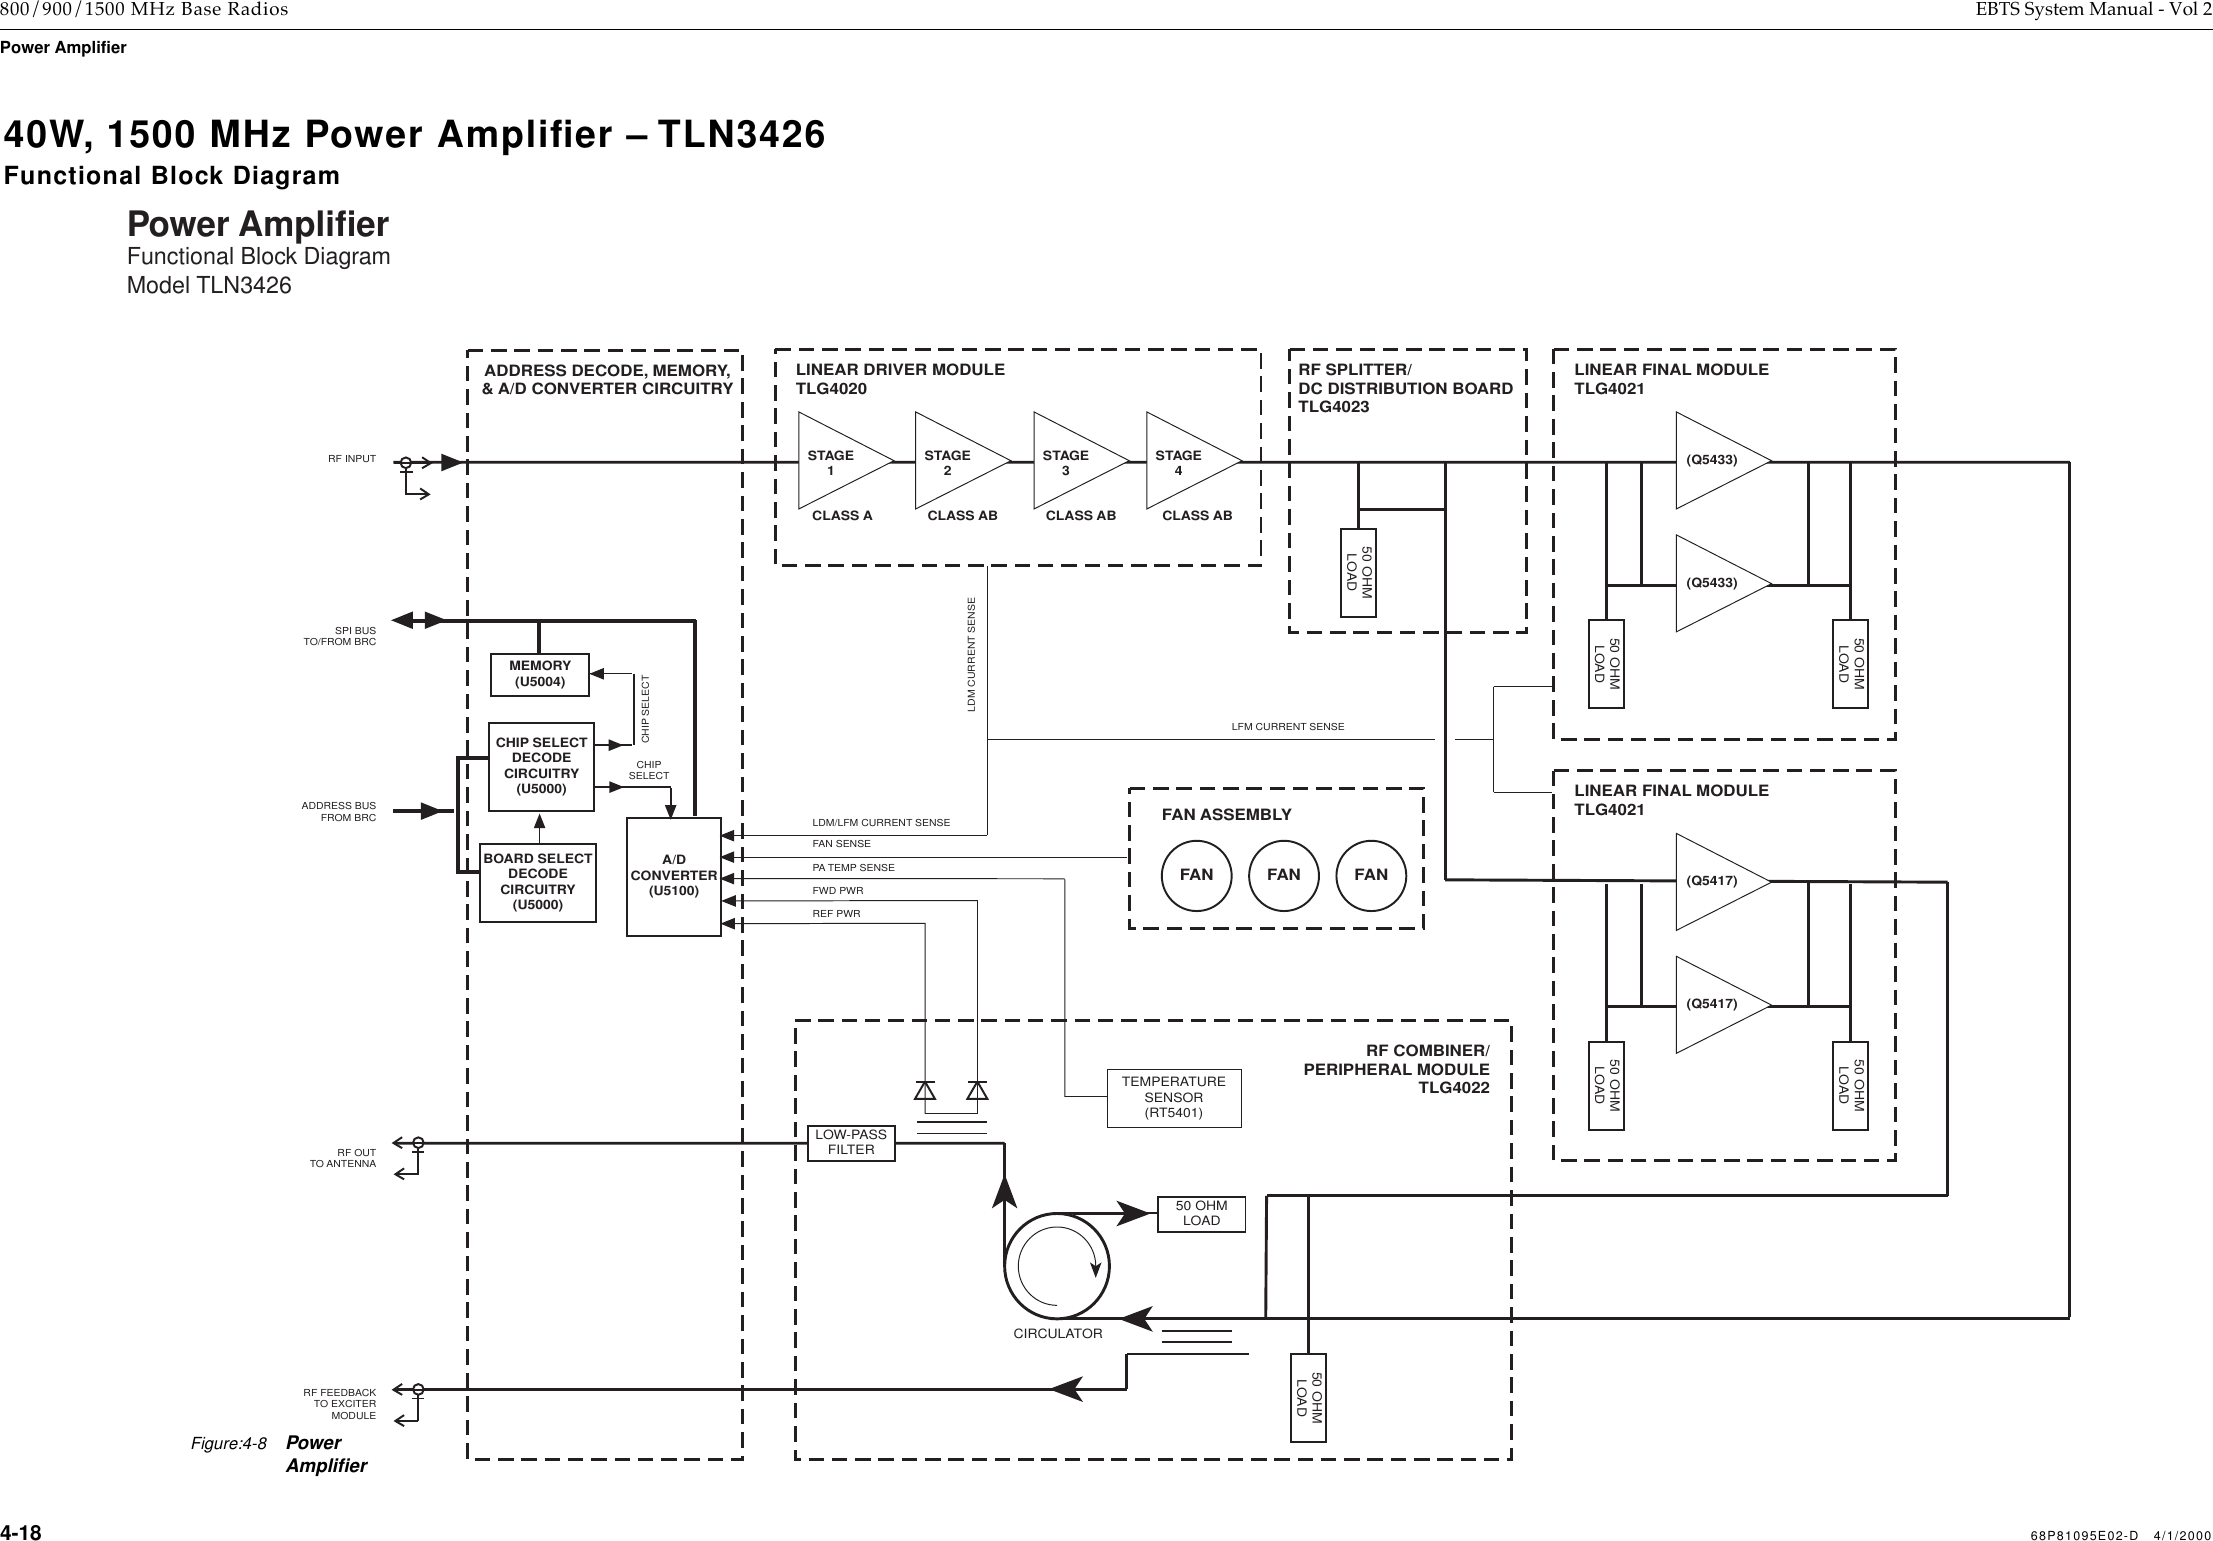  4-18 68P81095E02-D   4/1/2000 800/900/1500 MHz Base Radios EBTS System Manual - Vol 2 Power AmplifierPower AmplifierFunctional Block DiagramModel TLN3426LINEAR DRIVER MODULETLG4020STAGE1STAGE3STAGE4RF SPLITTER/DC DISTRIBUTION BOARDTLG402350 OHMLOADSTAGE2(Q5433)LINEAR FINAL MODULETLG4021(Q5433)50 OHMLOAD50 OHMLOAD(Q5417)LINEAR FINAL MODULETLG4021(Q5417)50 OHMLOAD50 OHMLOADADDRESS BUSFROM BRCSPI BUSTO/FROM BRCADDRESS DECODE, MEMORY,&amp; A/D CONVERTER CIRCUITRYMEMORY(U5004)A/DCONVERTER(U5100)BOARD SELECTDECODECIRCUITRY(U5000)PA TEMP SENSECHIPSELECTCHIP SELECTDECODECIRCUITRY(U5000)CHIP SELECTRF COMBINER/PERIPHERAL MODULETLG402250 OHMLOADLOW-PASSFILTERRF INPUTRF OUTTO ANTENNARF FEEDBACKTO EXCITERMODULEREF PWRFWD PWR50 OHMLOADCIRCULATORFAN SENSELDM/LFM CURRENT SENSEFAN ASSEMBLYFAN FANFANLFM CURRENT SENSELDM CURRENT SENSETEMPERATURESENSOR(RT5401)CLASS A CLASS AB CLASS AB CLASS ABFigure:4-8Power Ampliﬁer 40W, 1500 MHz Power Ampliﬁer – TLN3426 Functional Block Diagram